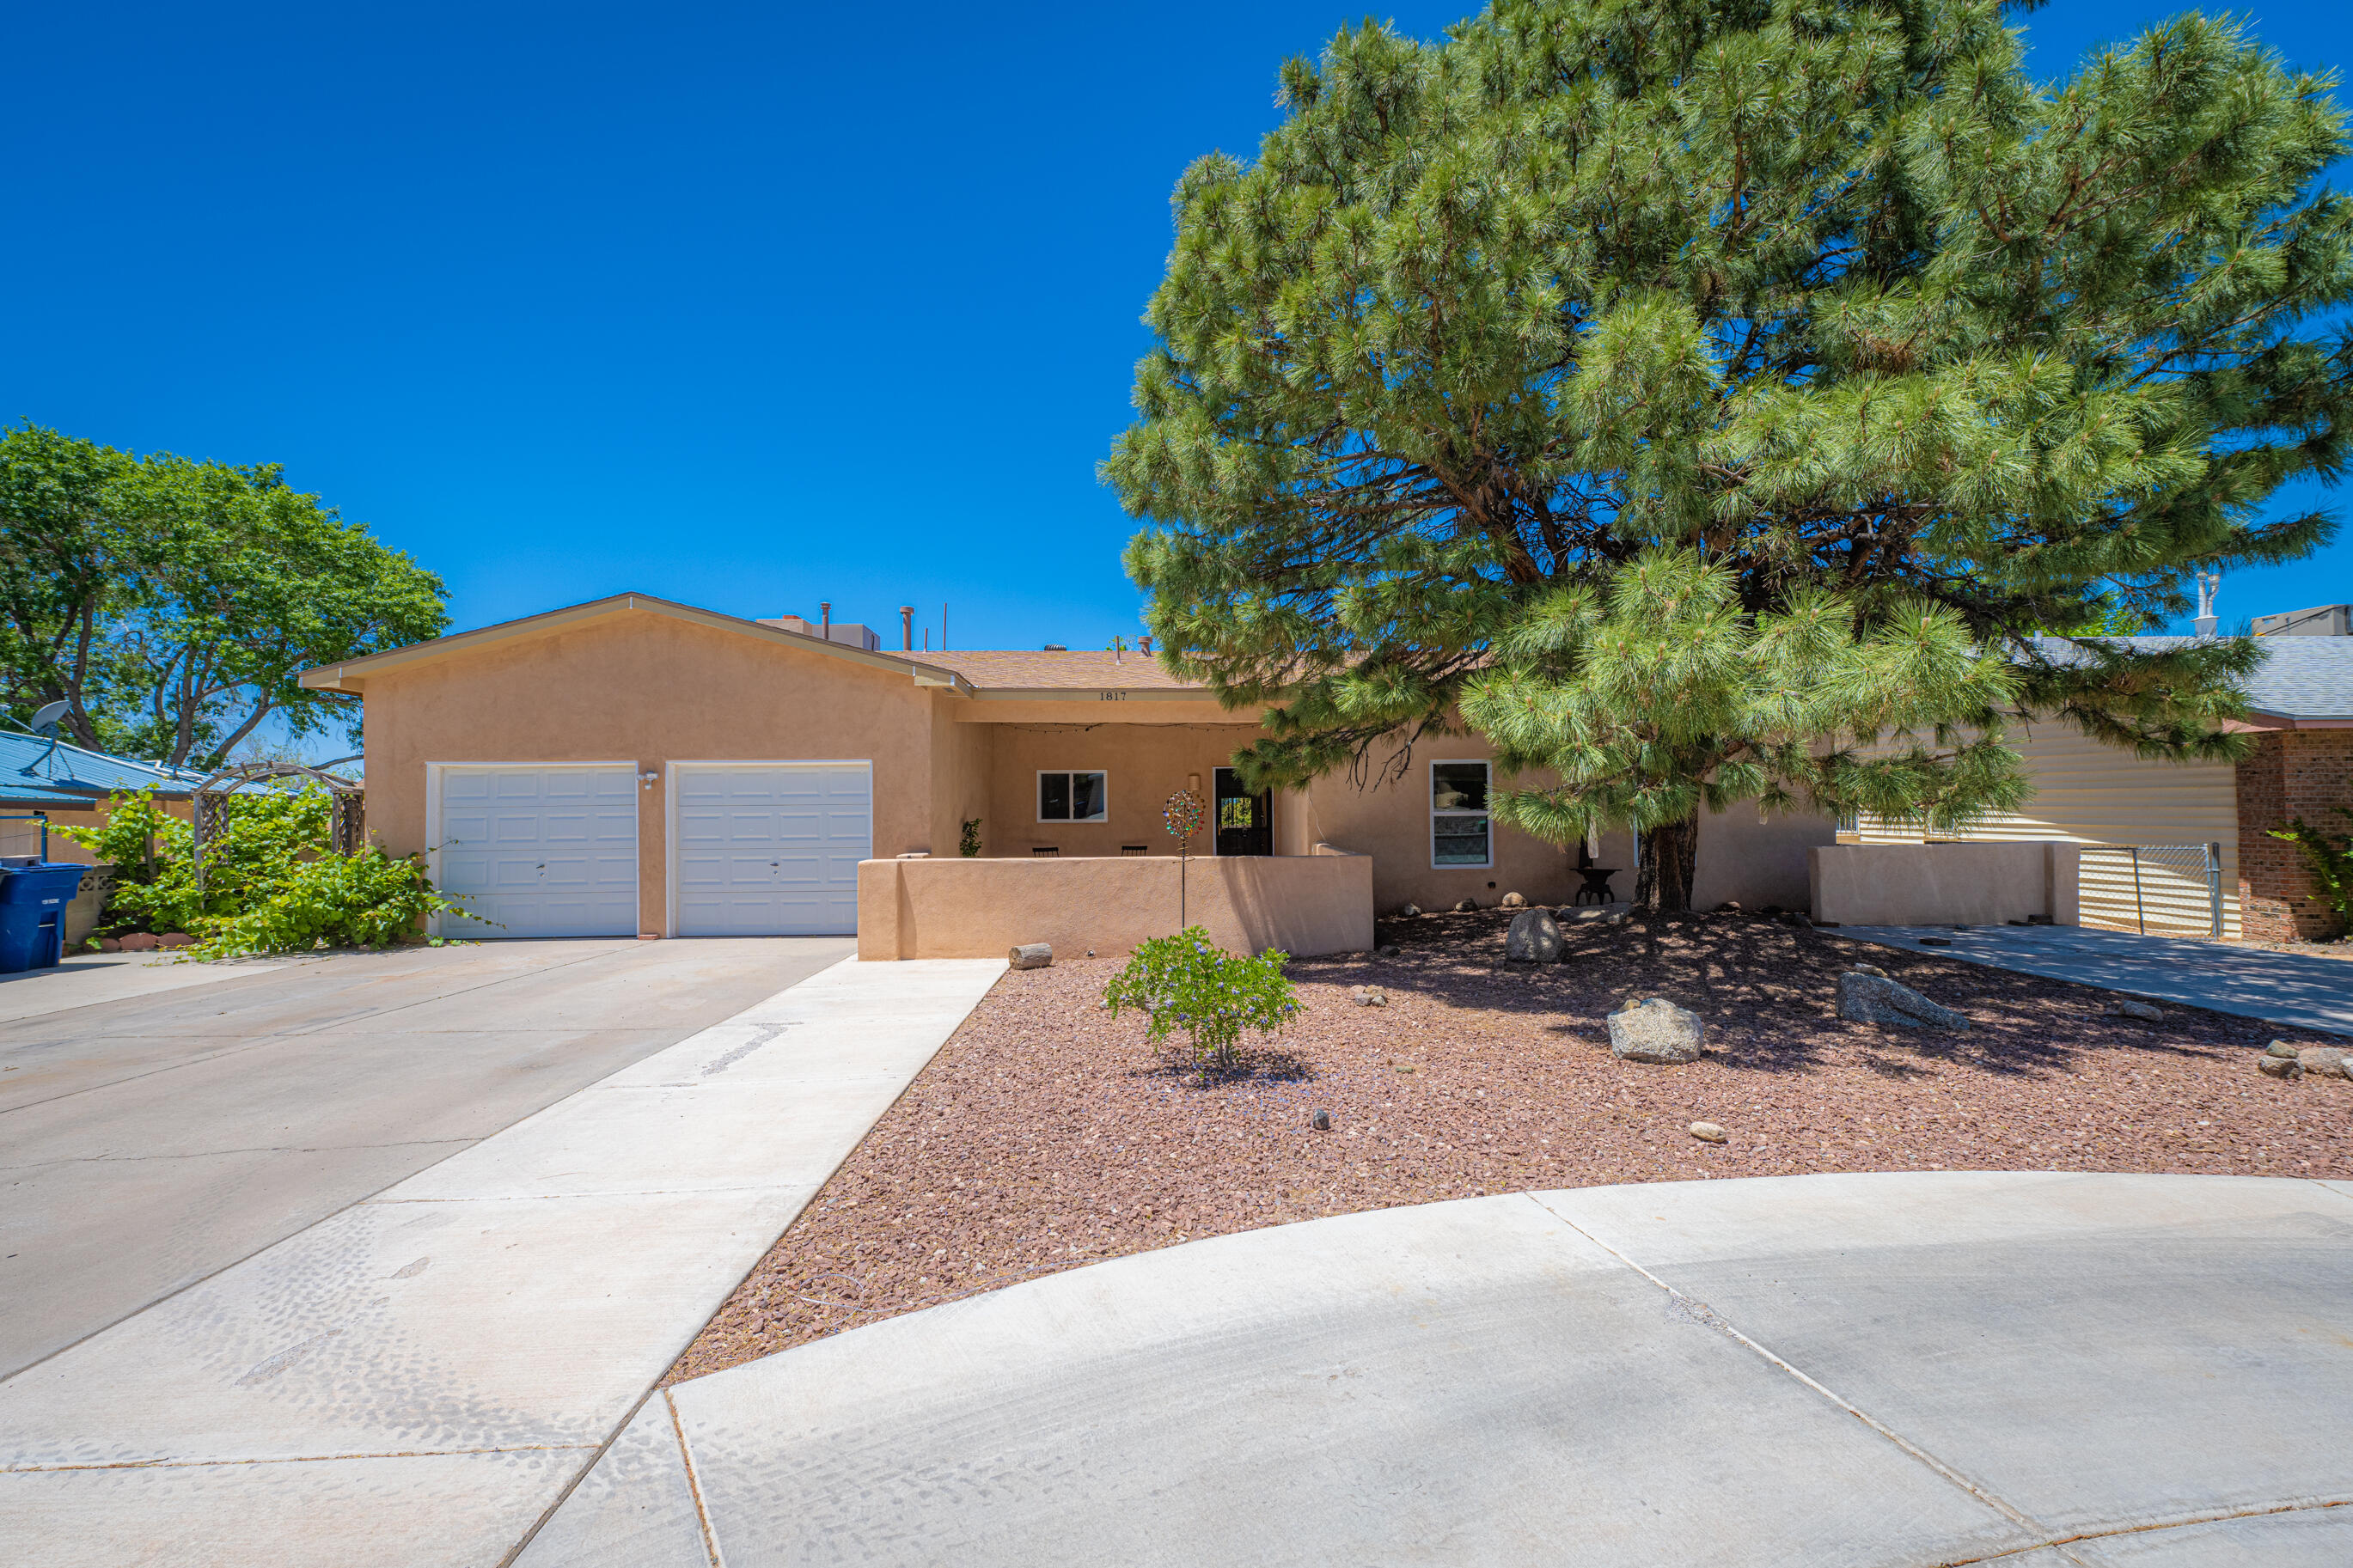 Superb 4 BR with many updates in Eldorado H.S. District! Kitchen was re-done in 2010, has pantry and cozy nook; Formal DR and LR have pretty tile, could be game rm/media room; Spacious and comfy den has FP and bookshelves; MBR has walk-in closet. Newer windows, stucco, roof and baths. Custom window coverings. Oversized garage has bonus storage area. Popular area near Tramway trails. Relax w/ your morning coffee and enjoy some mountain views from the front courtyard. Shows great!